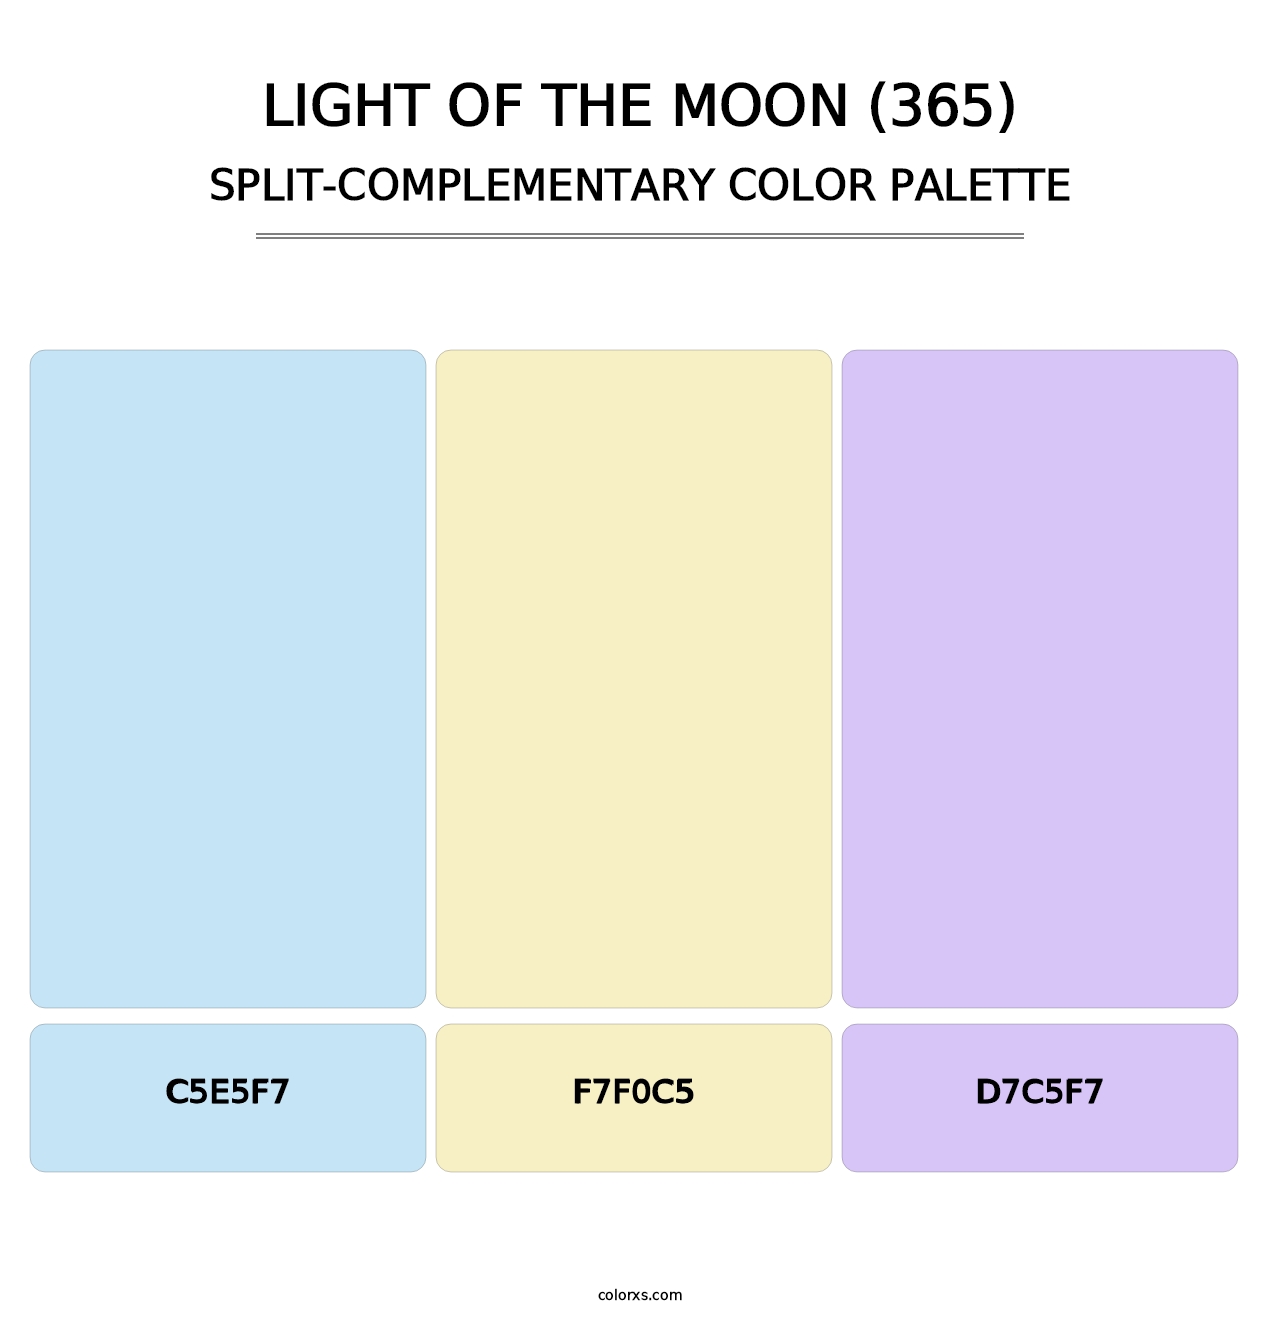 Light of the Moon (365) - Split-Complementary Color Palette